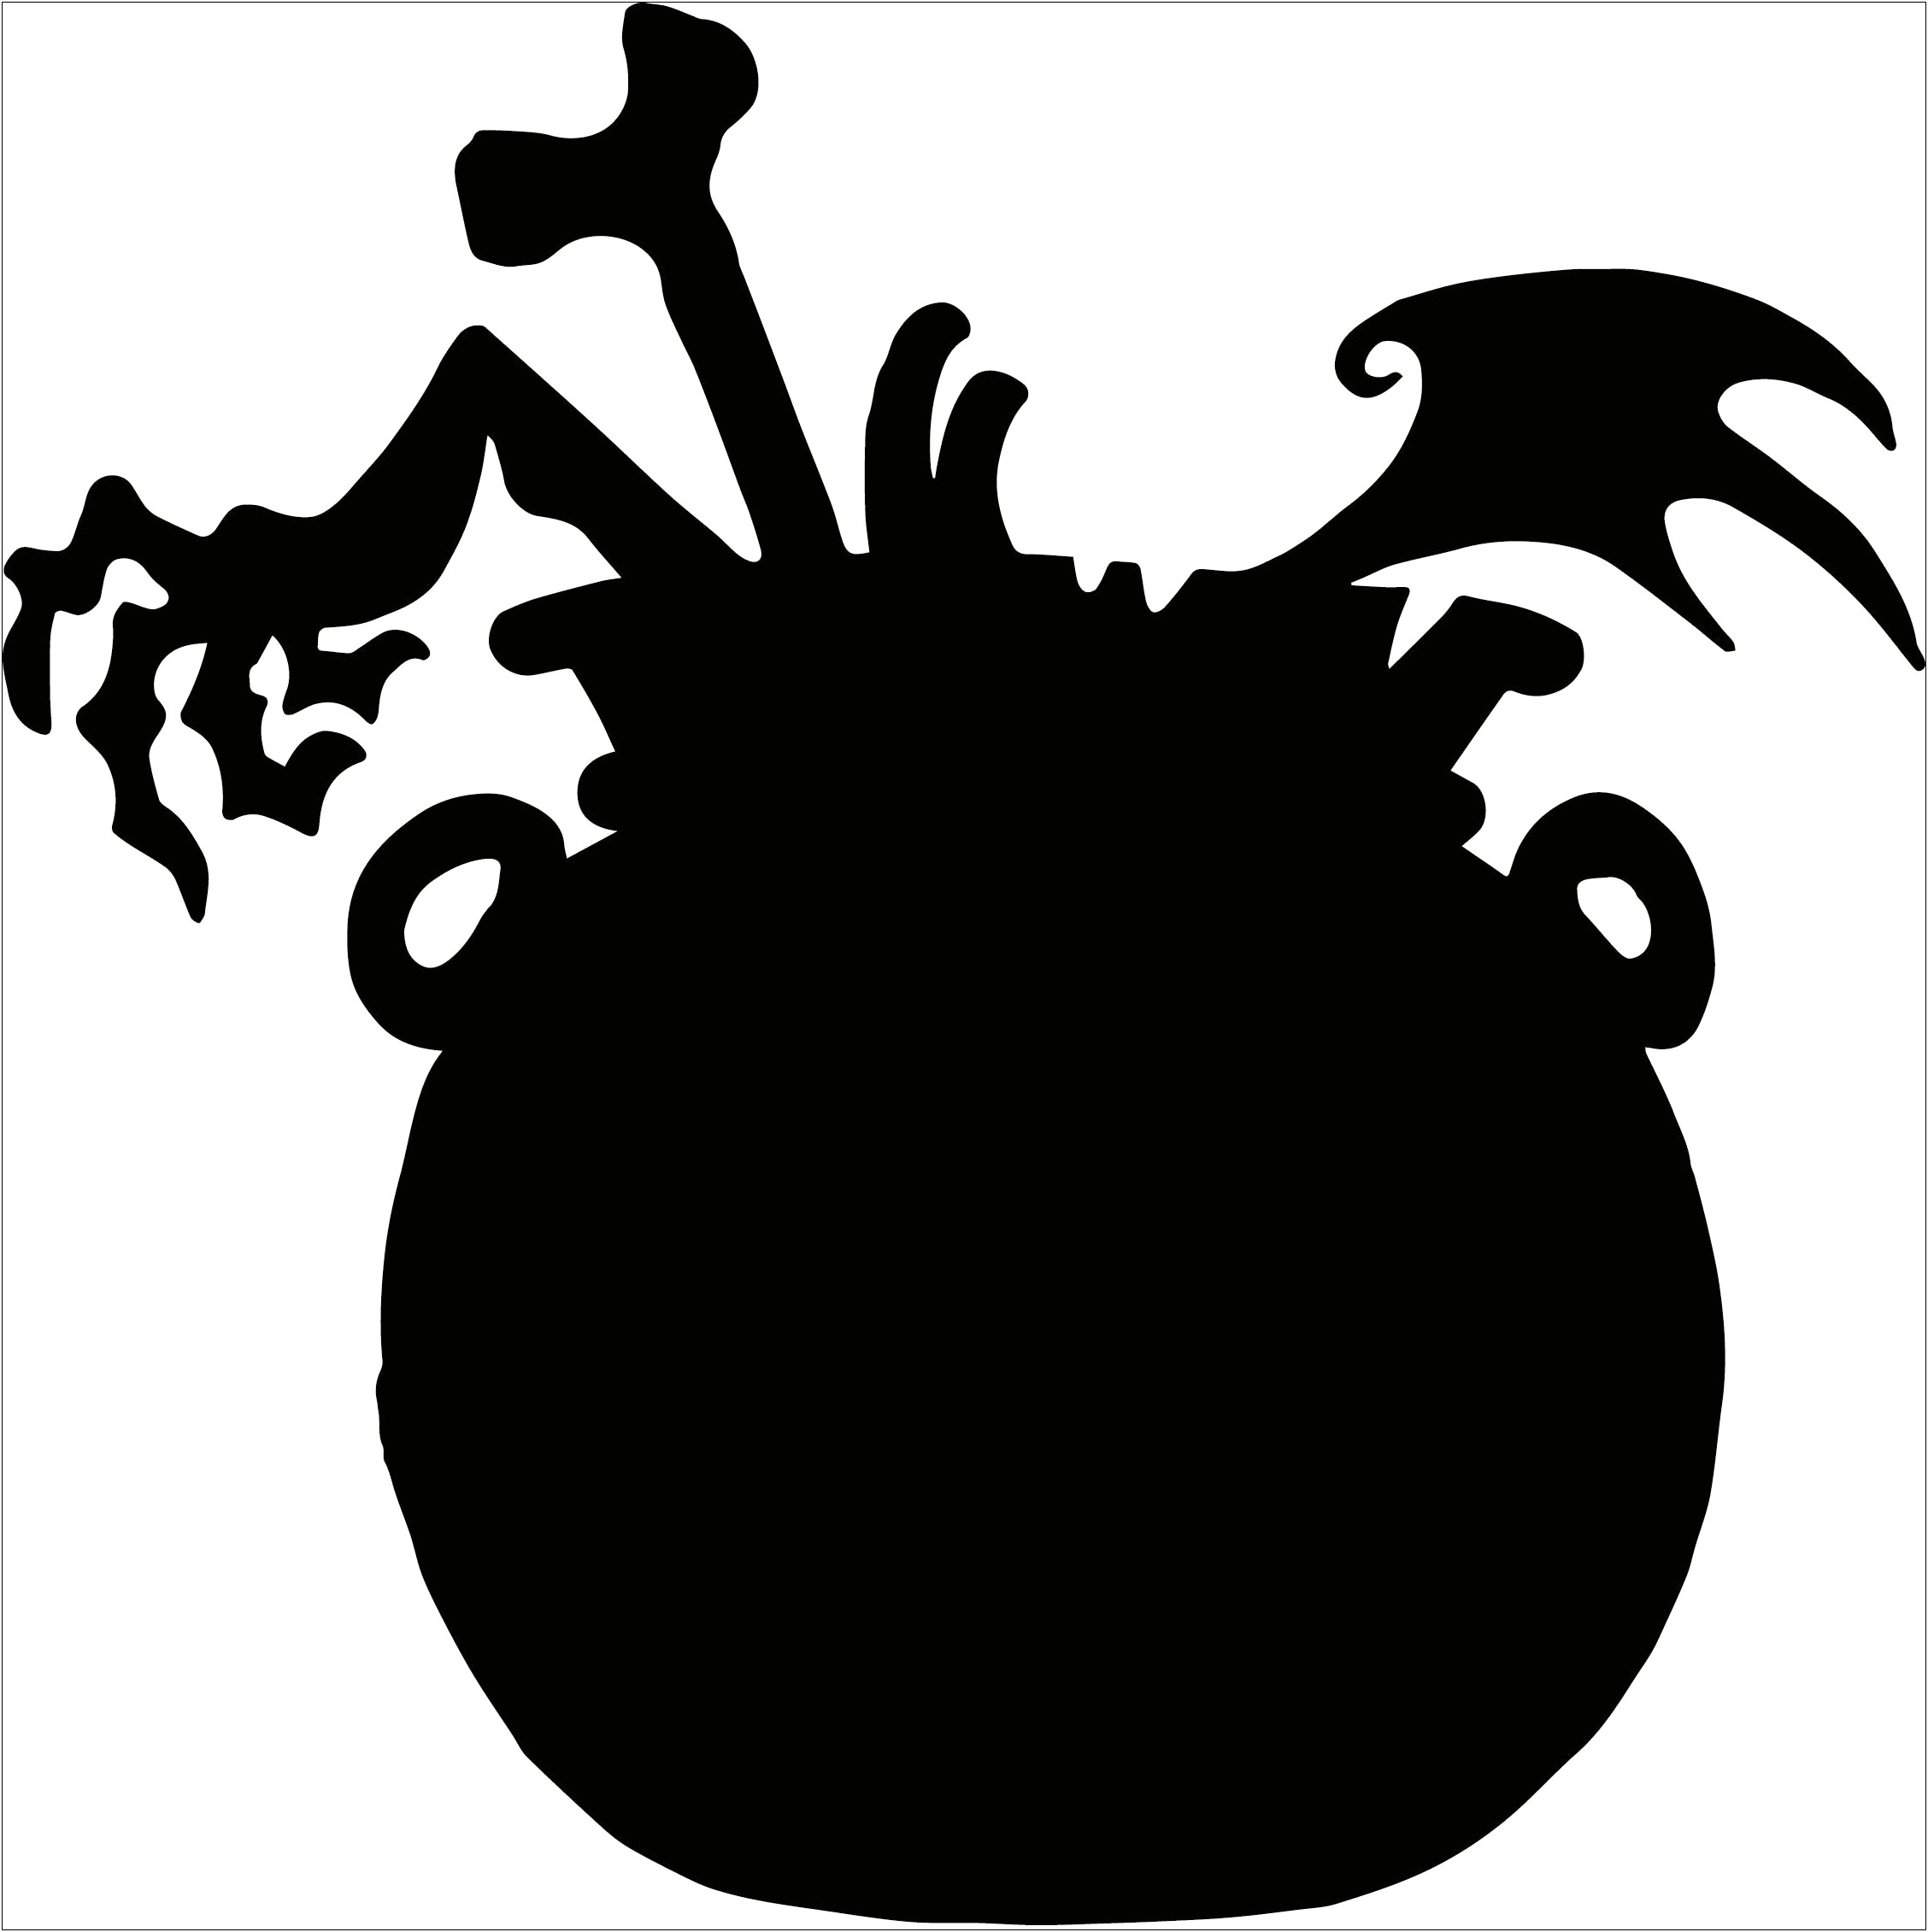 Free Halloween Images For Silhouette Templates